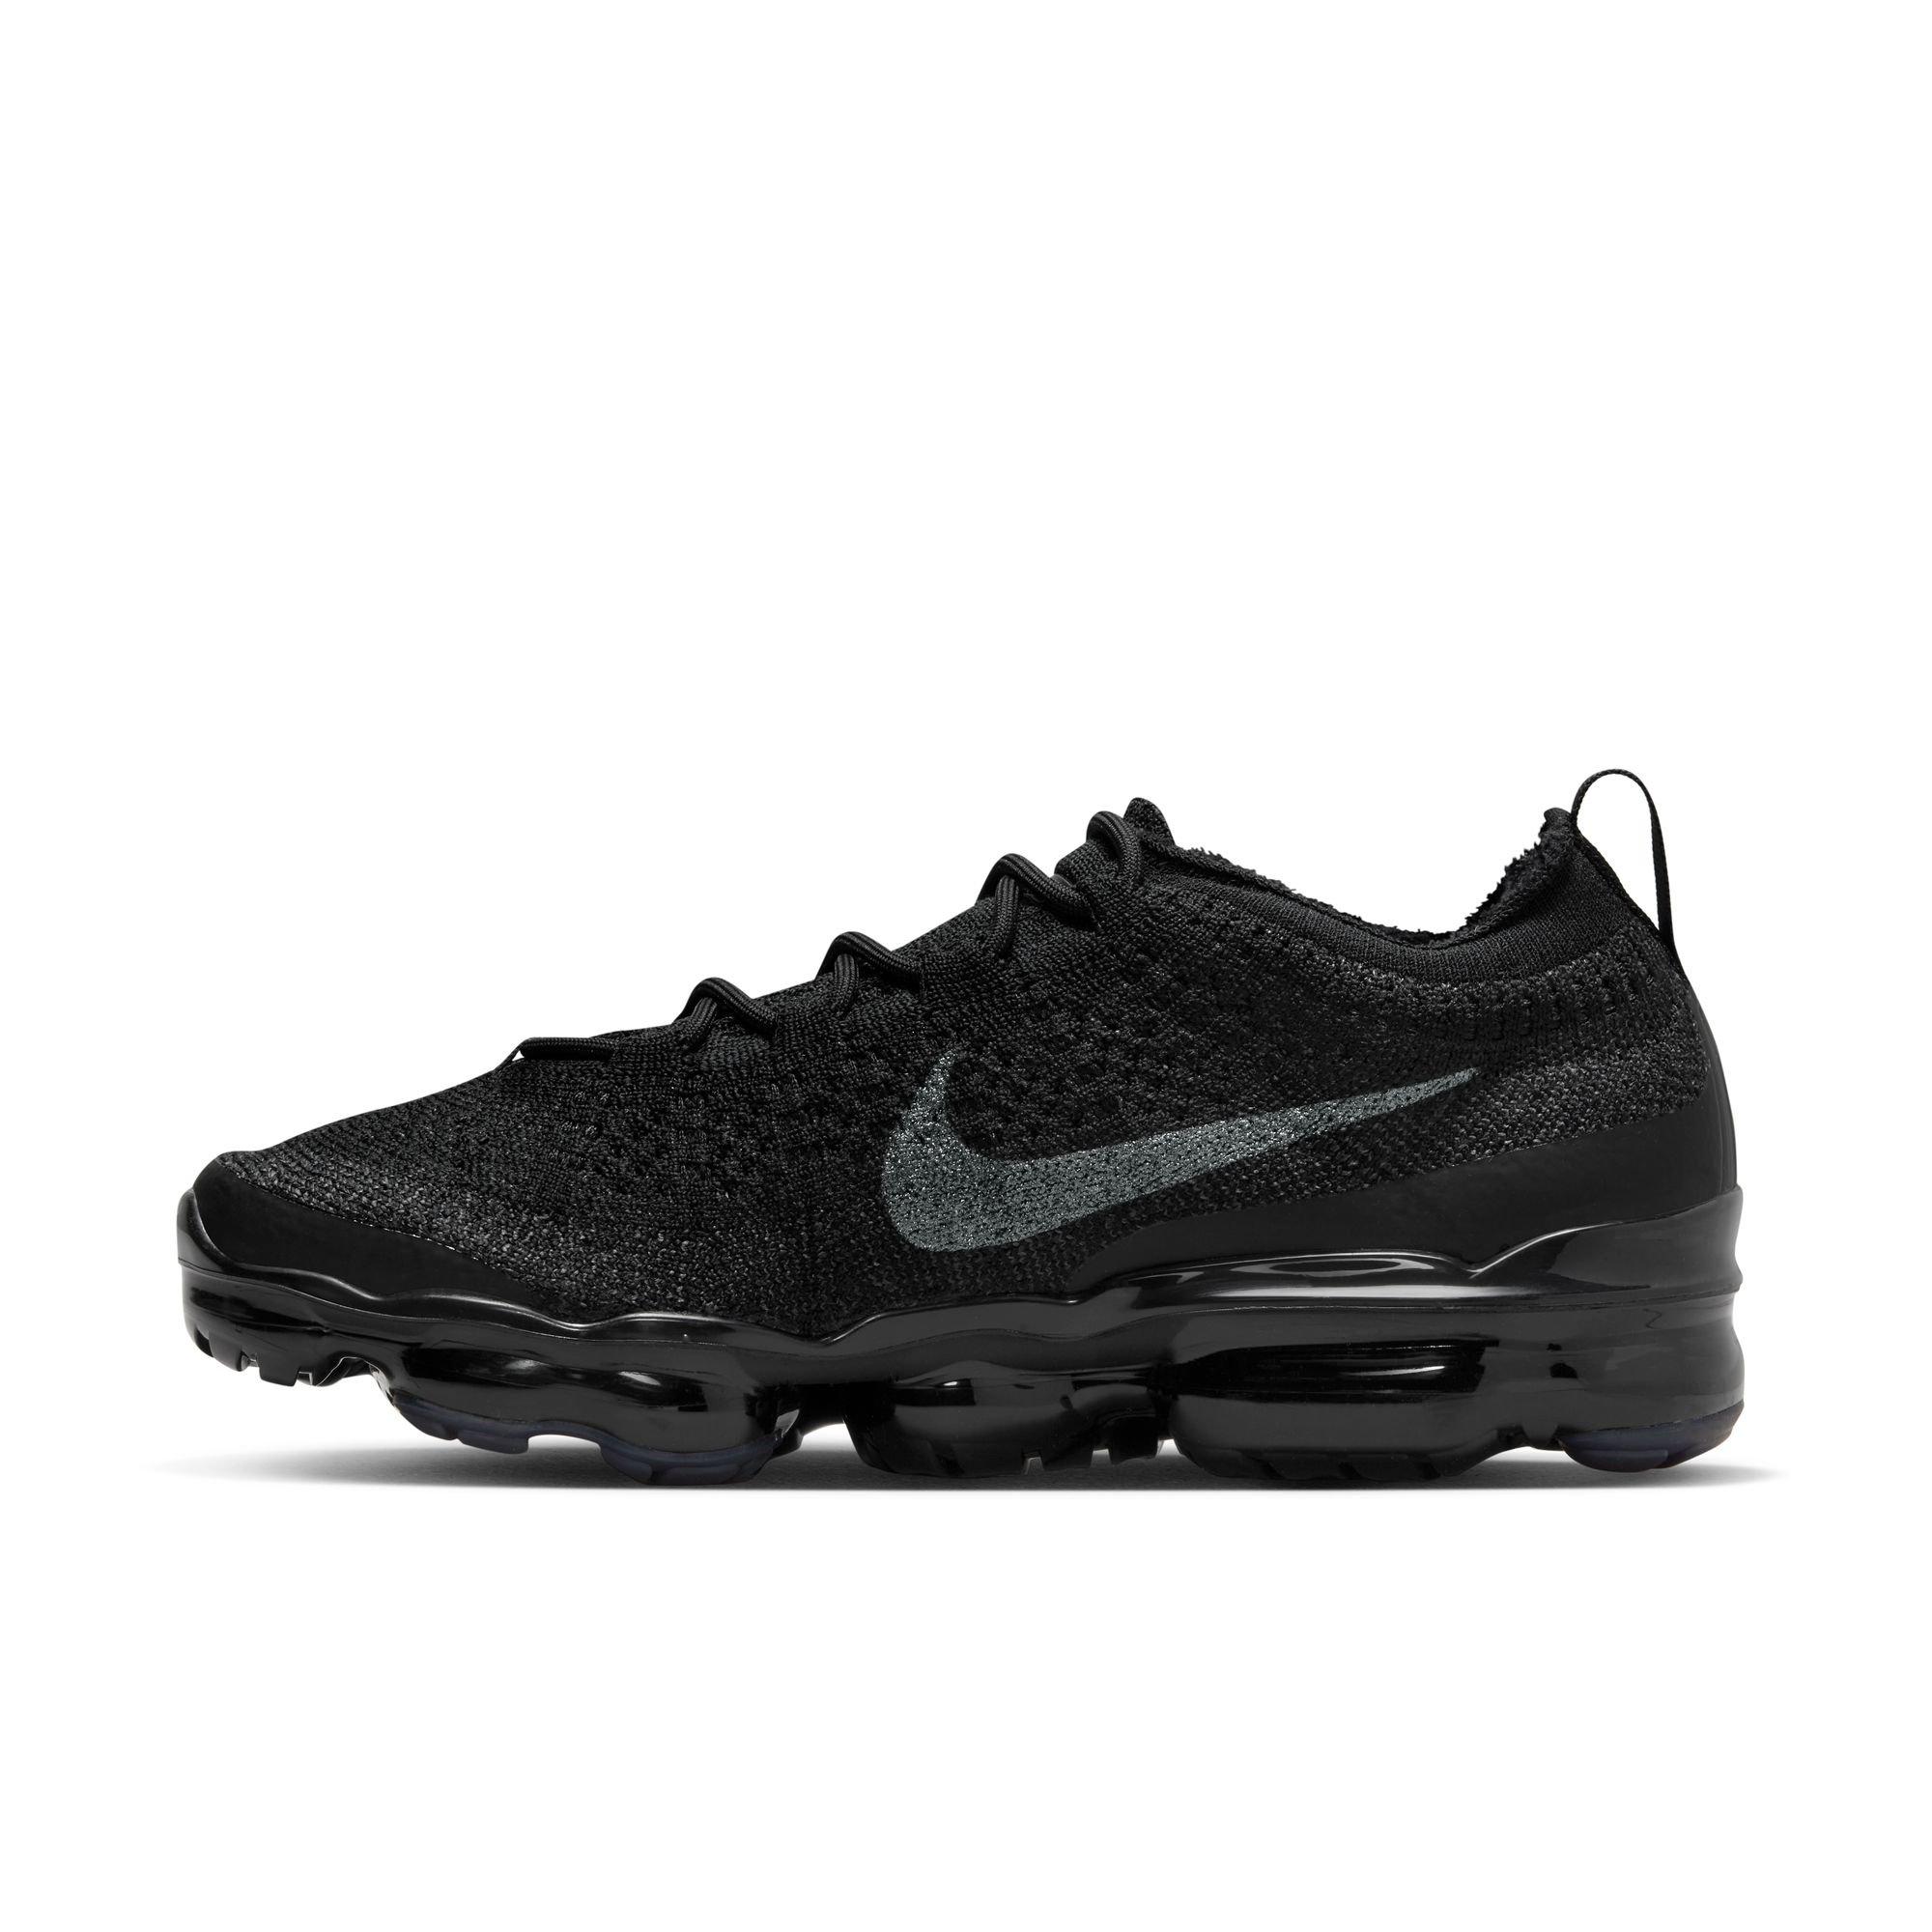 Hibbett on X: @Nike may have found something with this 'Fossil/Black'  Women's #VaporMax Flyknit 3 dropping 3/12. #Hibbett View Women's Vapormax  FK